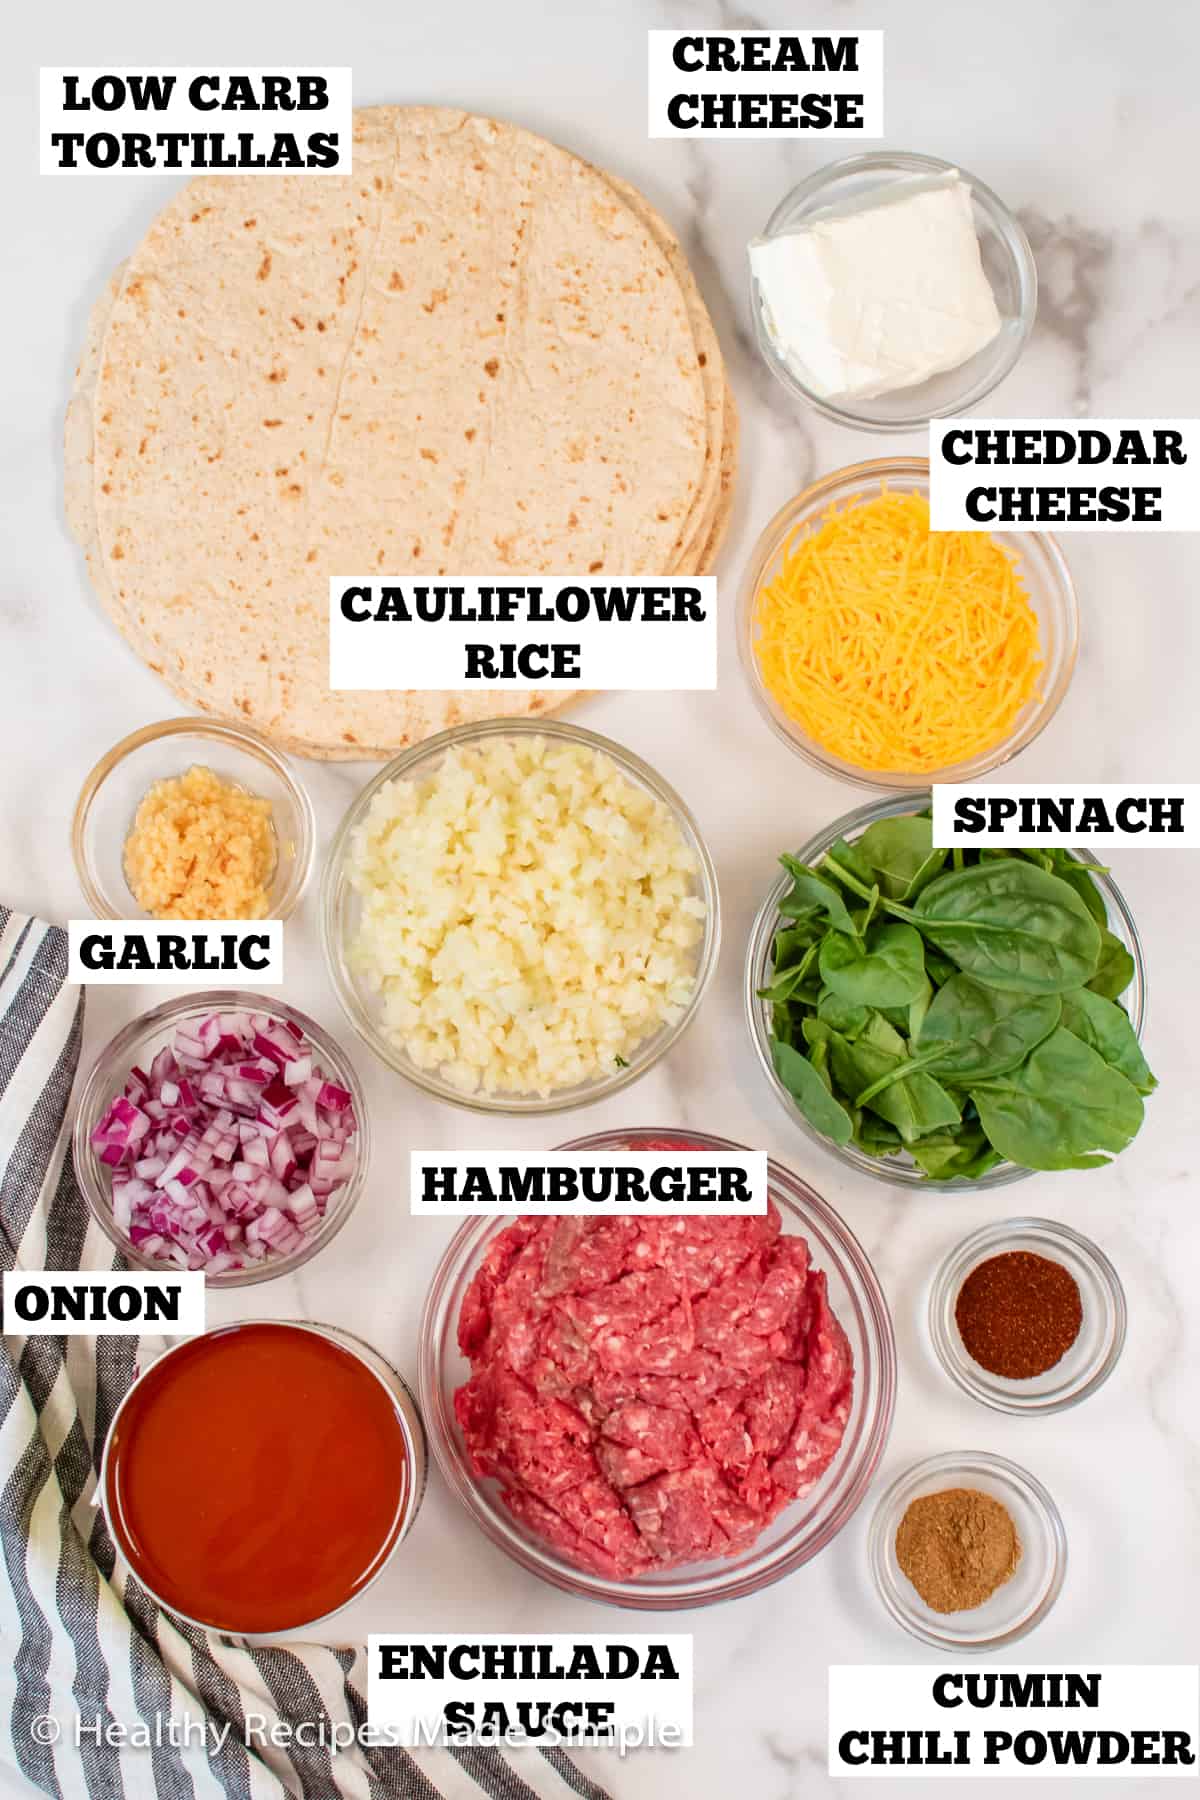 All the ingredients needed for making low carb beef enchiladas.